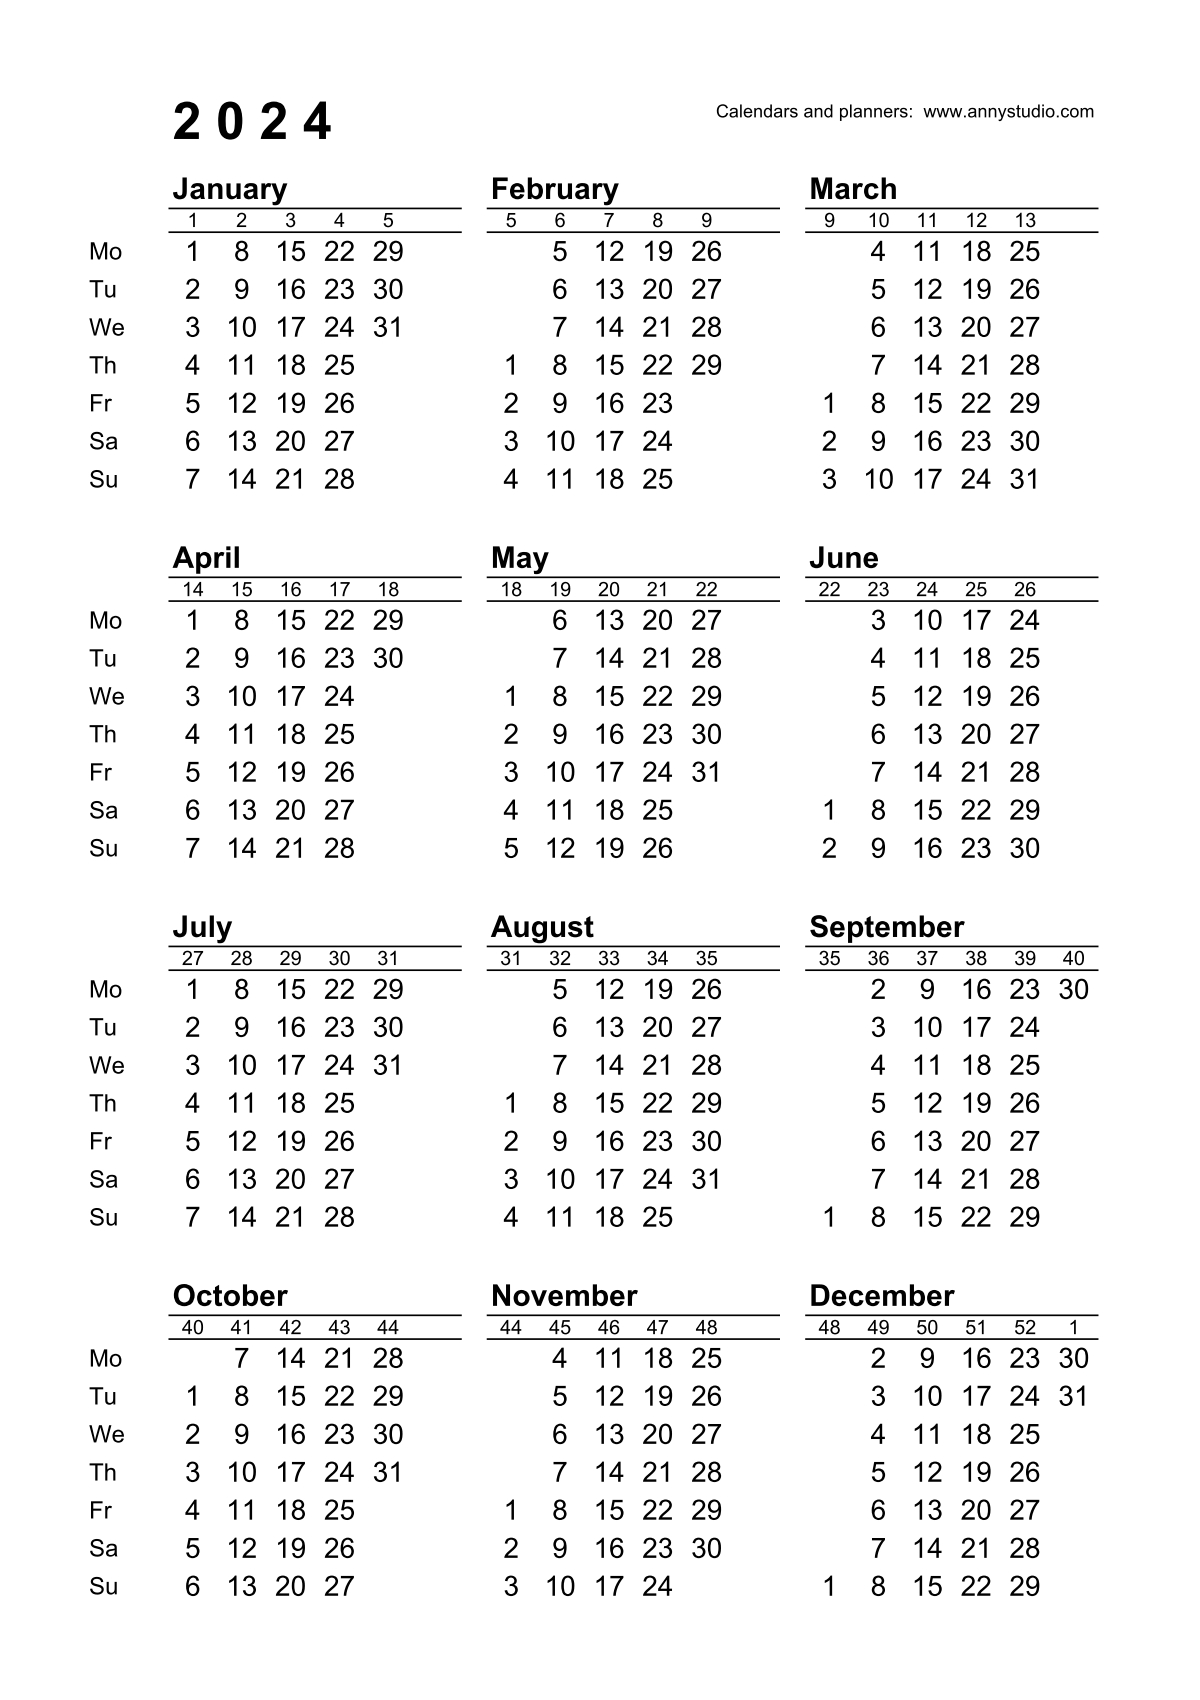 Free Printable Calendars And Planners 2024, 2025 And 2026 | 2024 Qld Calendar Printable Free